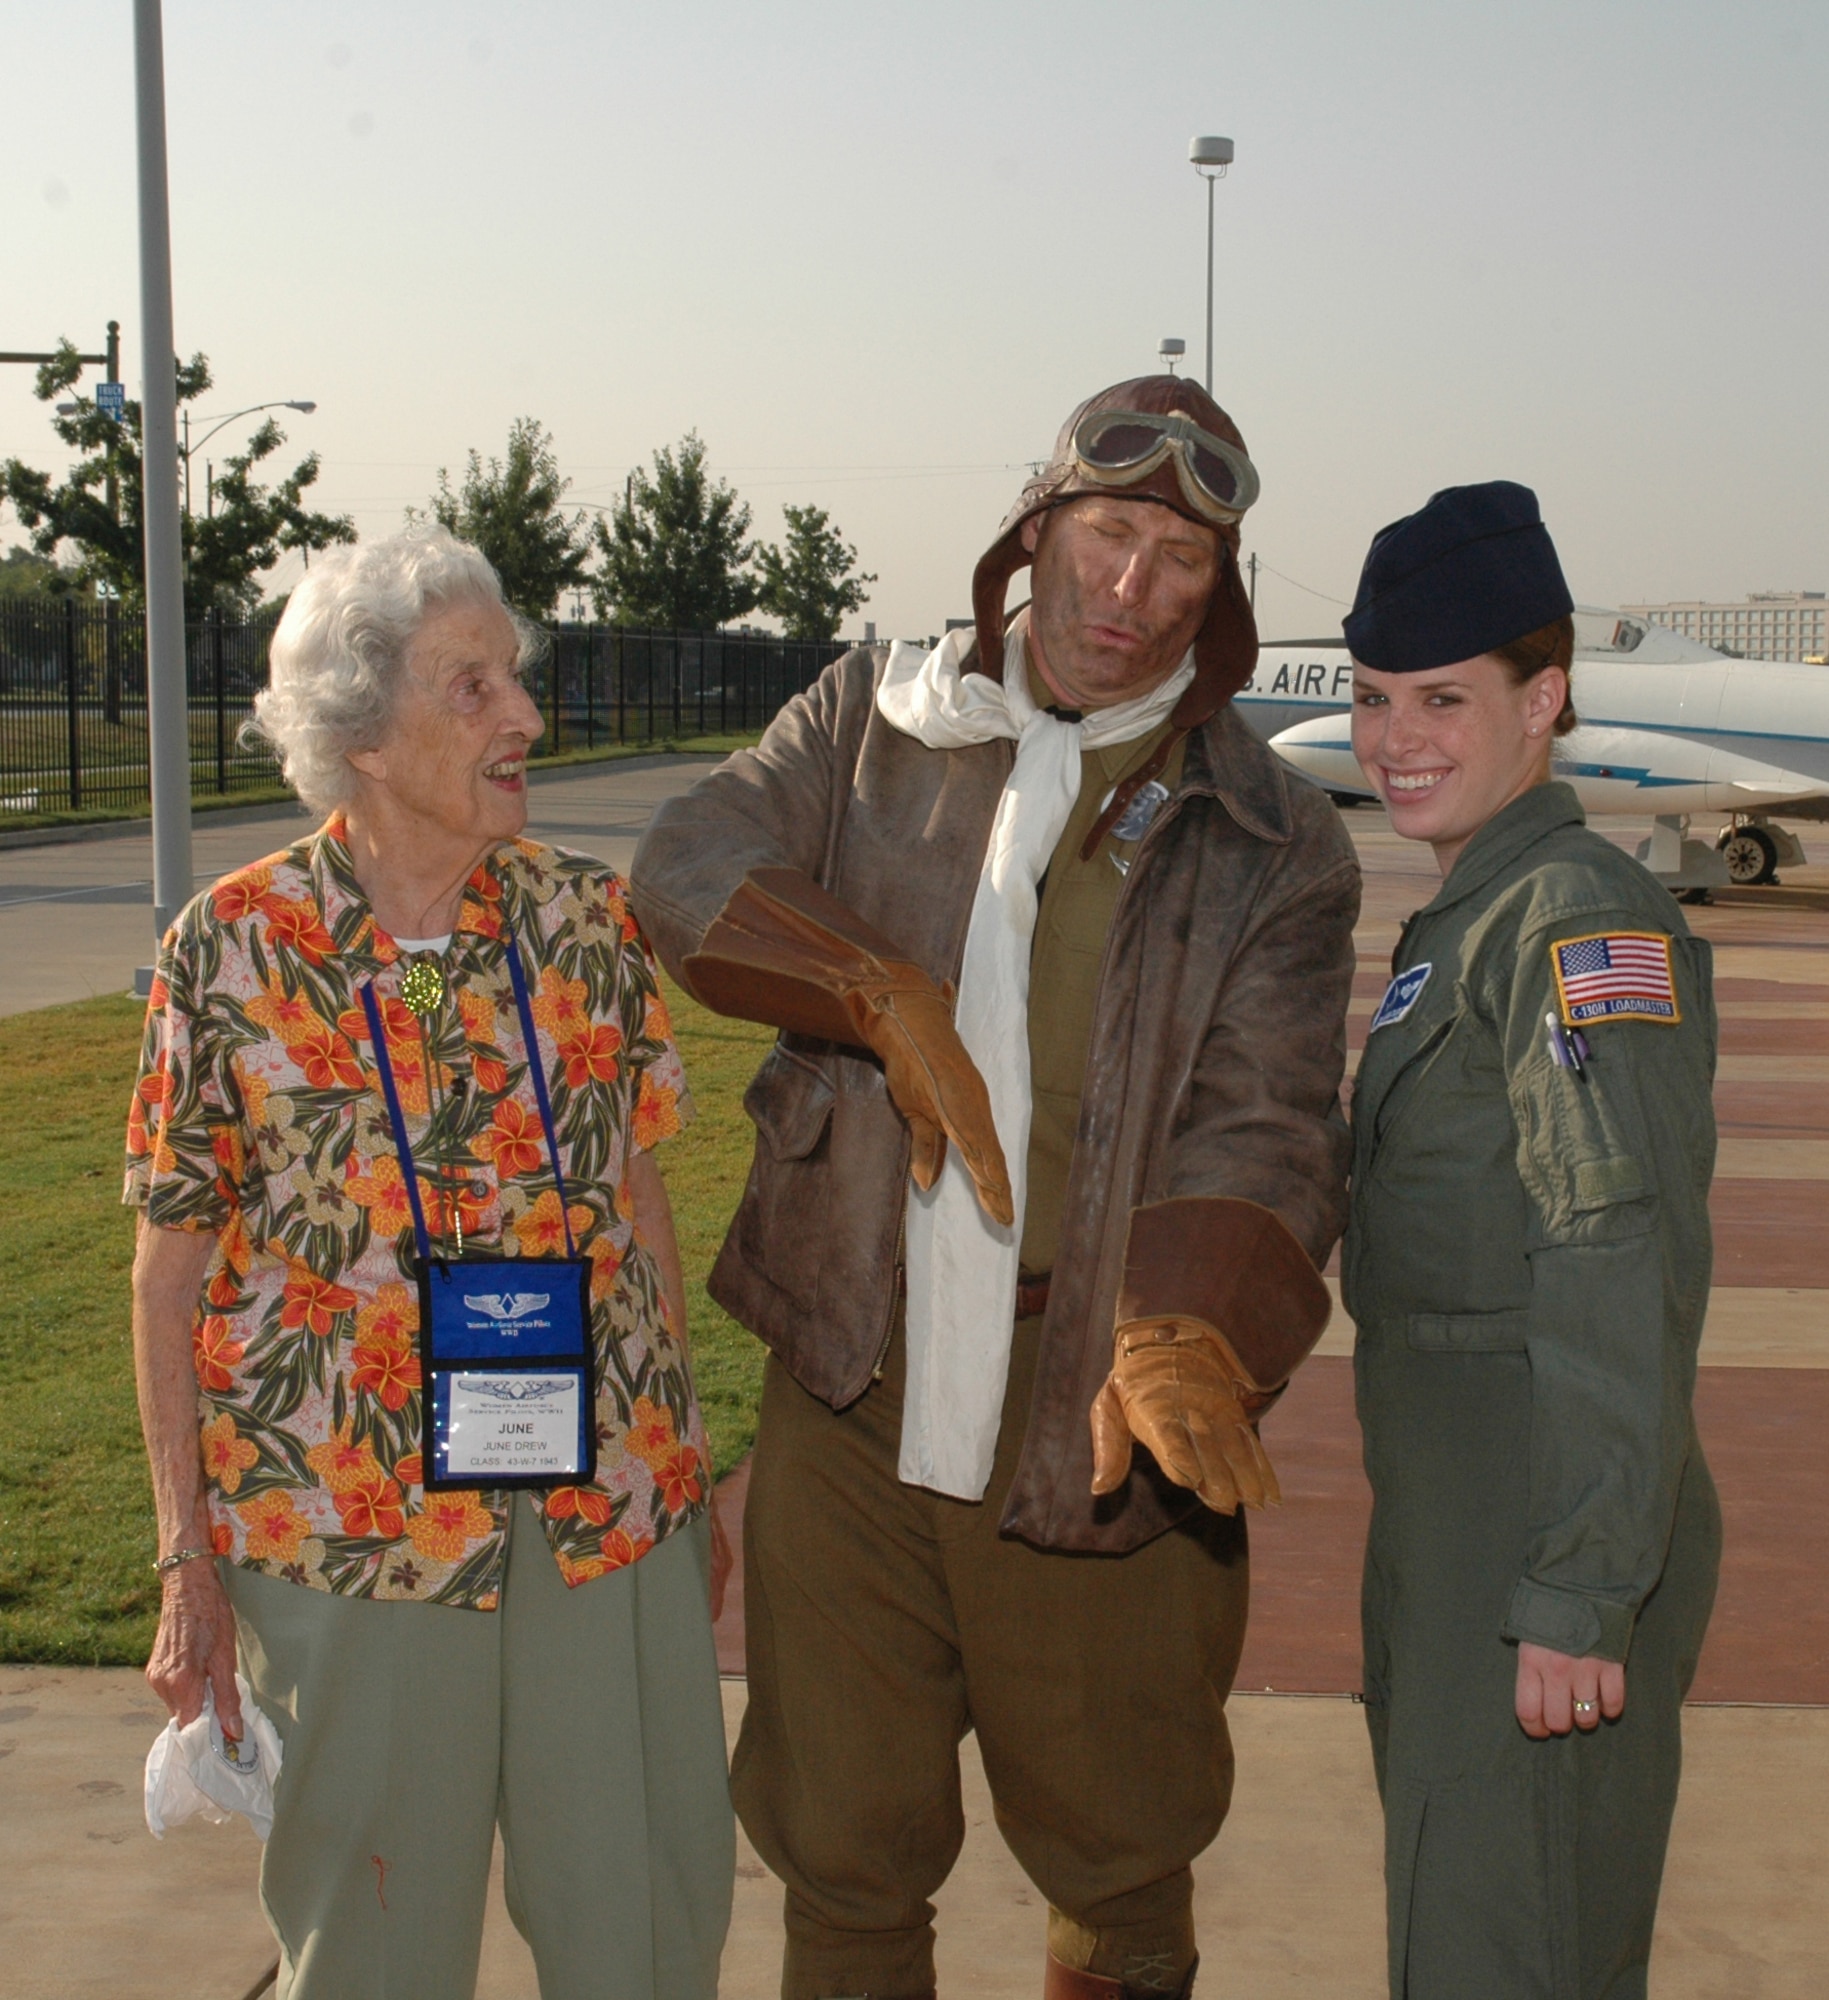 Dressed as a World War II flyer, Michael Vincent of Flagstaff, Ariz., poses with former WASP June Drew and Senior Airman Leigha Samples. Vincent is a WASP historian and archivist. Samples is a C-130 Hercules loadmaster with Maxwell AFB, Ala.'s 357th Airlift Squadron, 908th Airlift Wing. (U.S. Air Force Photo by Staff Sgt. Jay Ponder